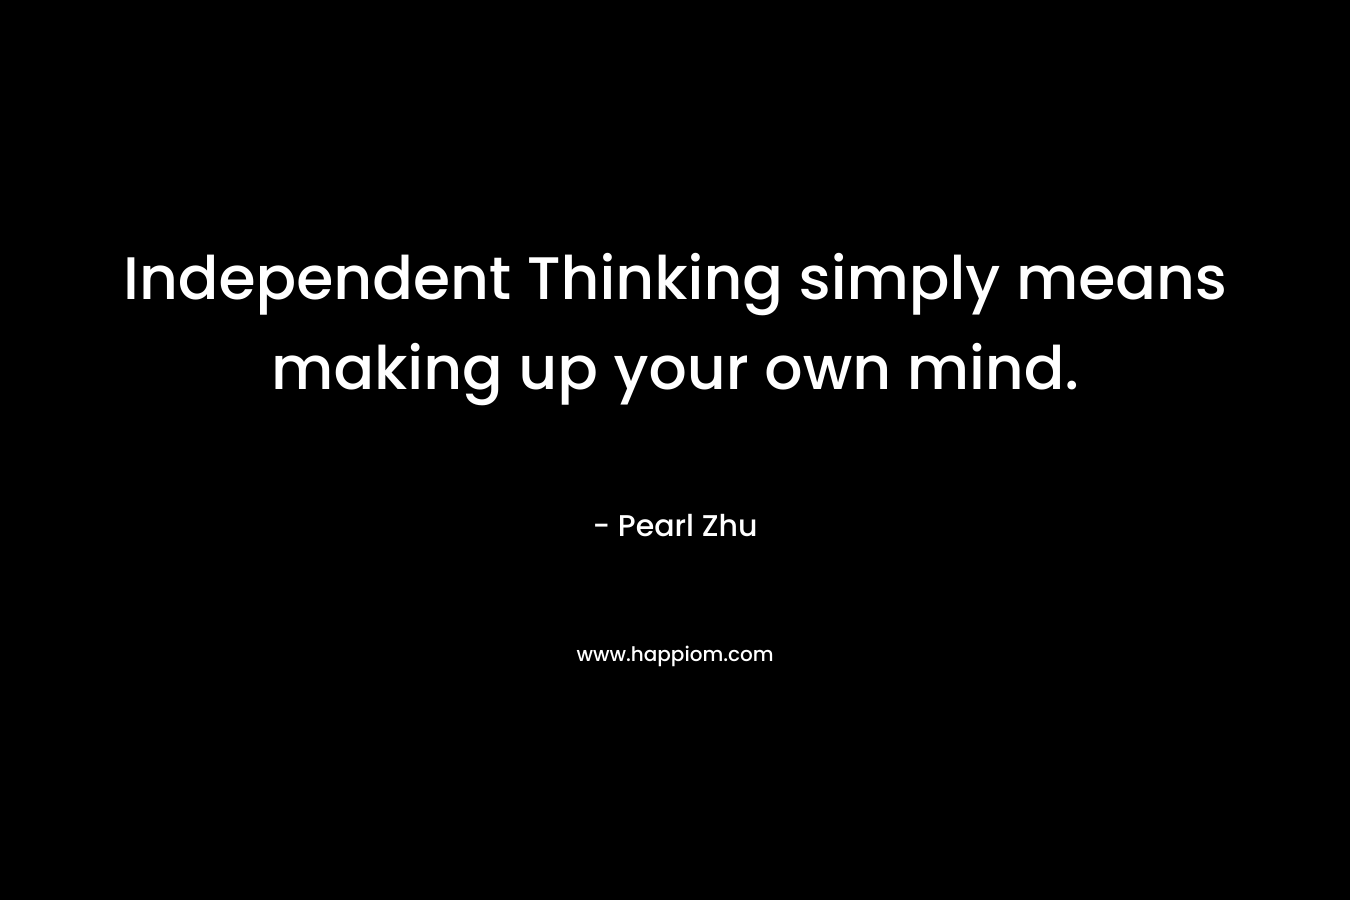 Independent Thinking simply means making up your own mind.